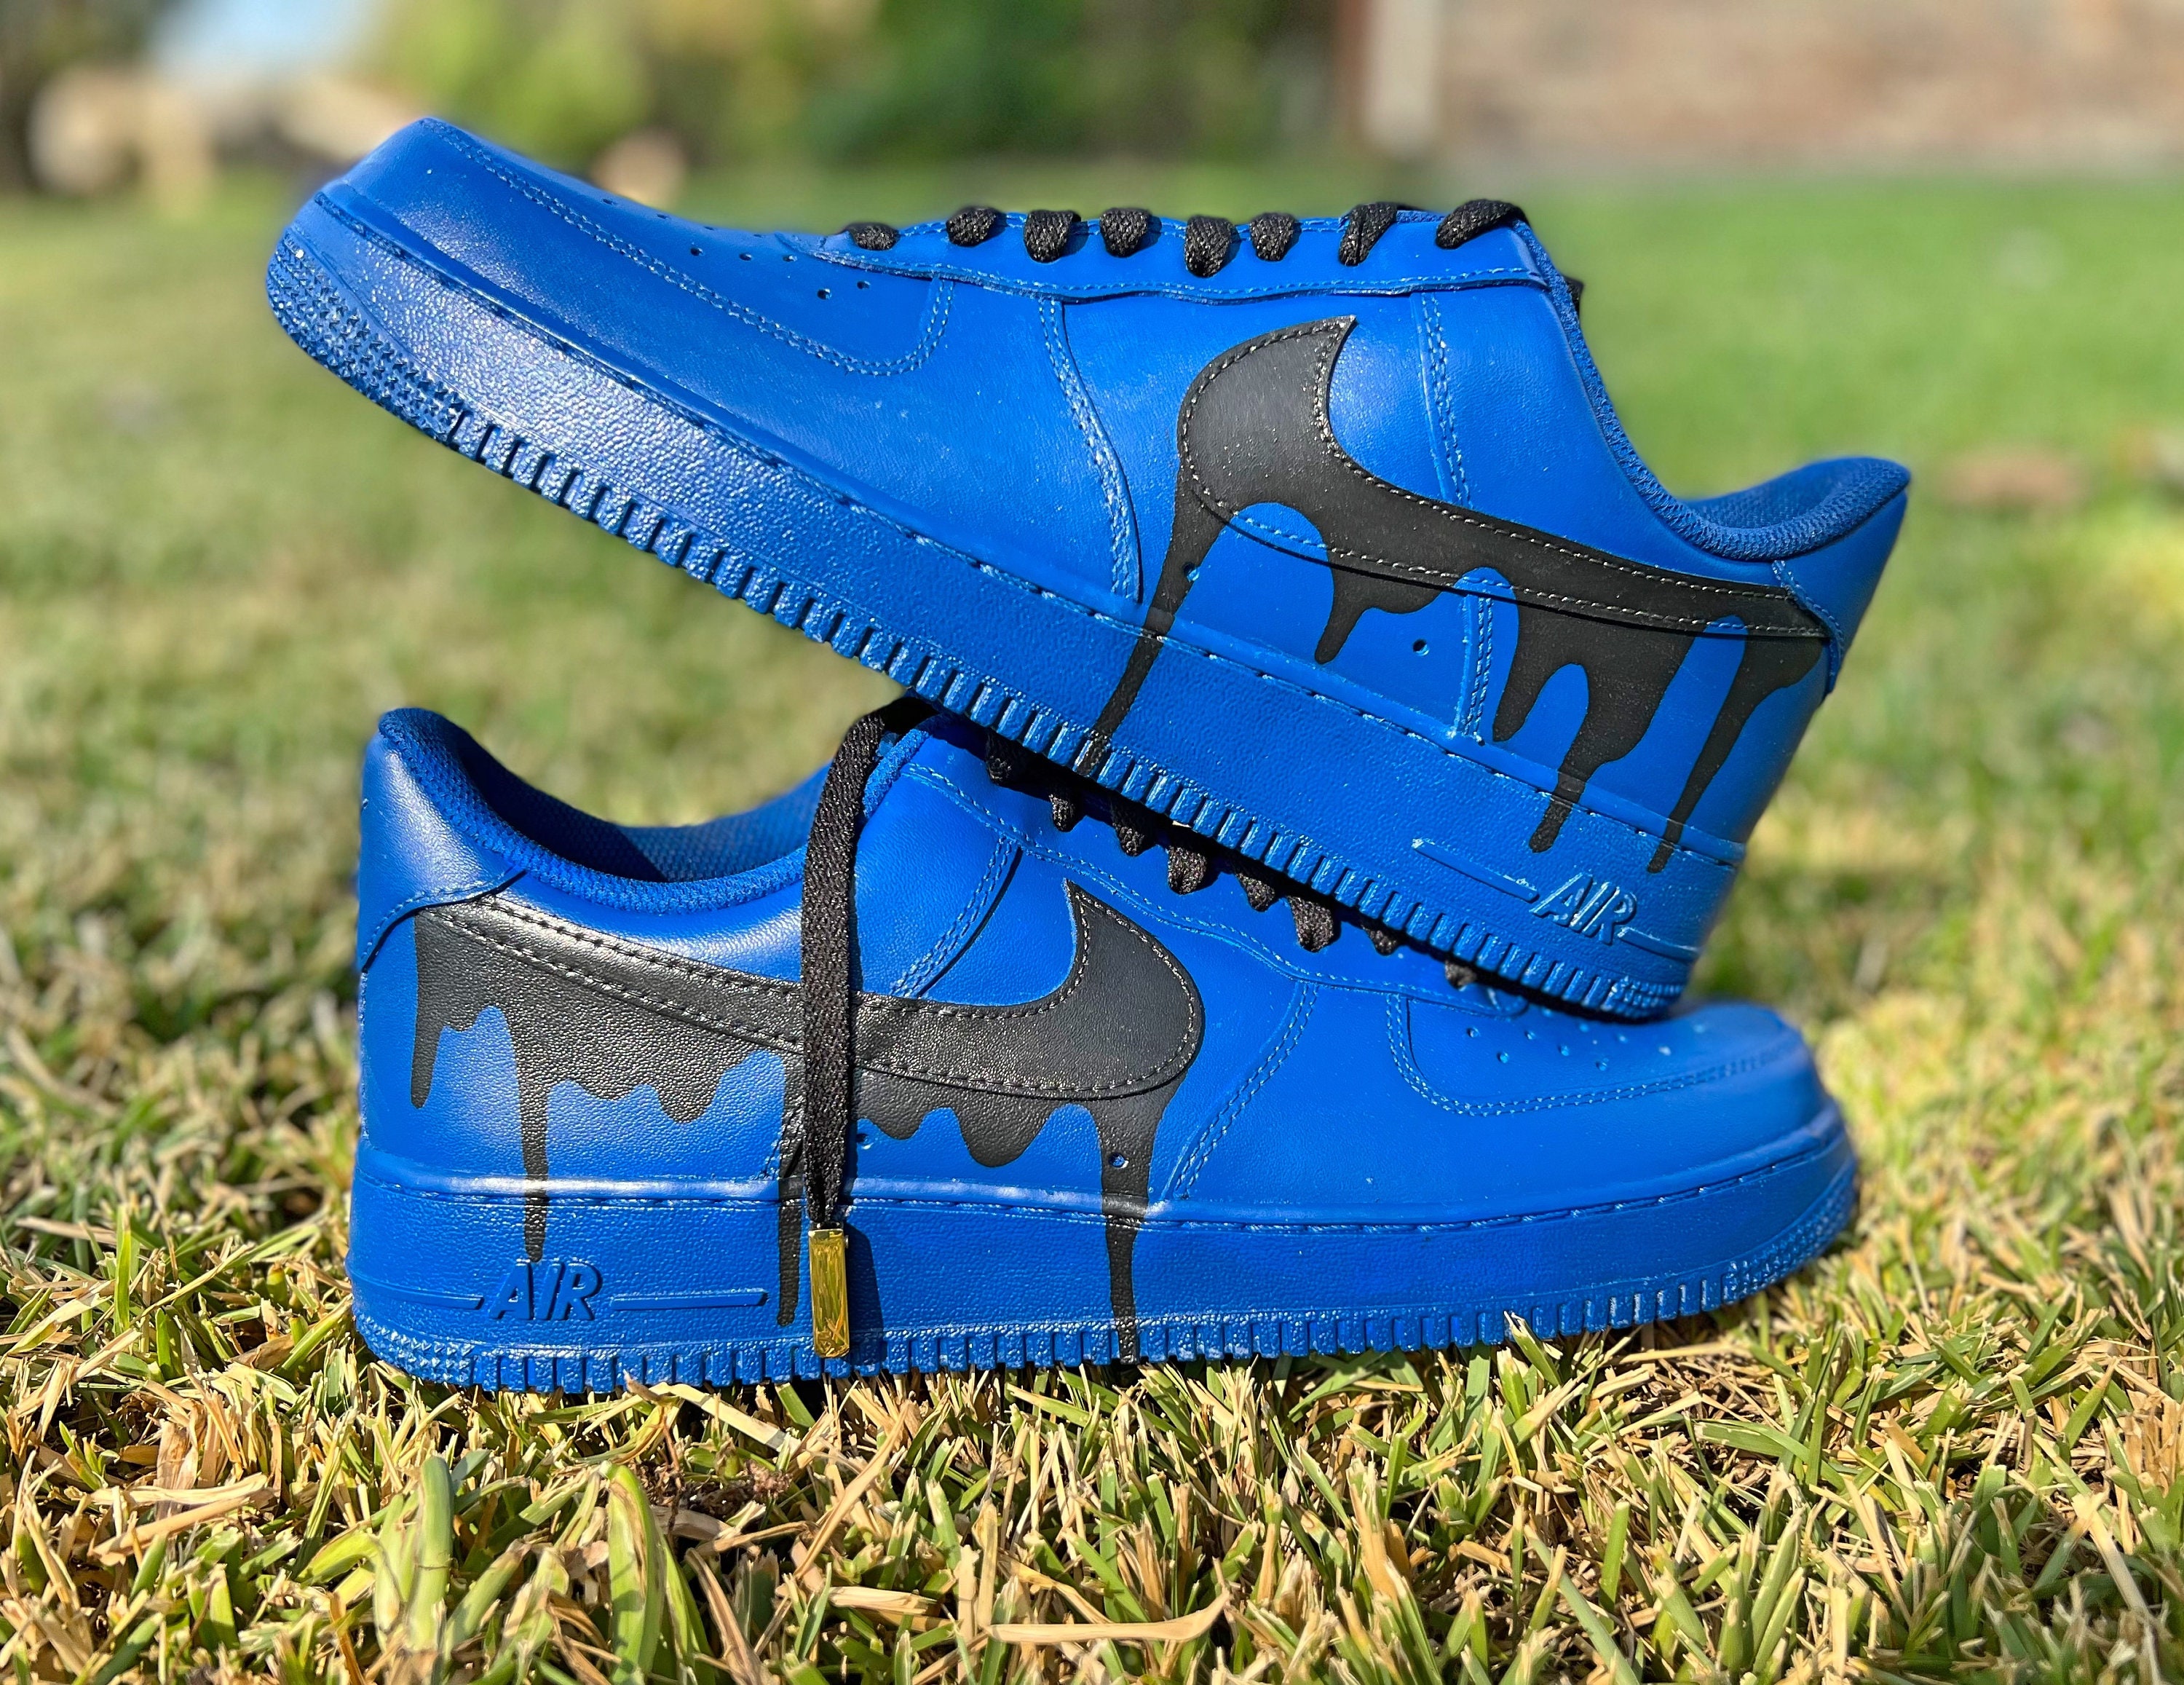 Nike Air Force 1 High By You Men's Custom Shoes